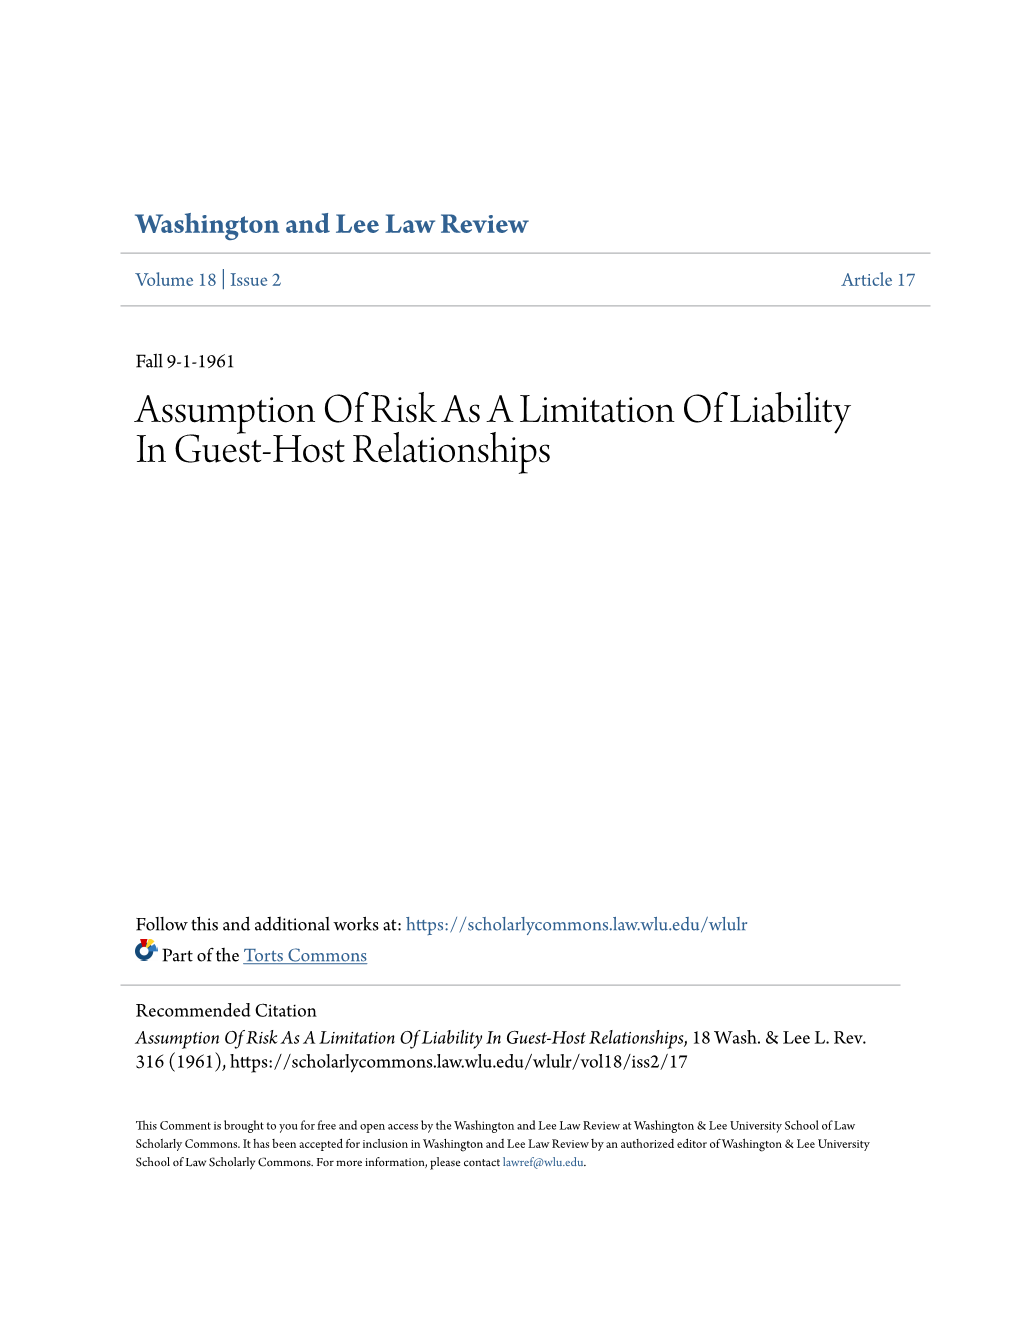 Assumption of Risk As a Limitation of Liability in Guest-Host Relationships